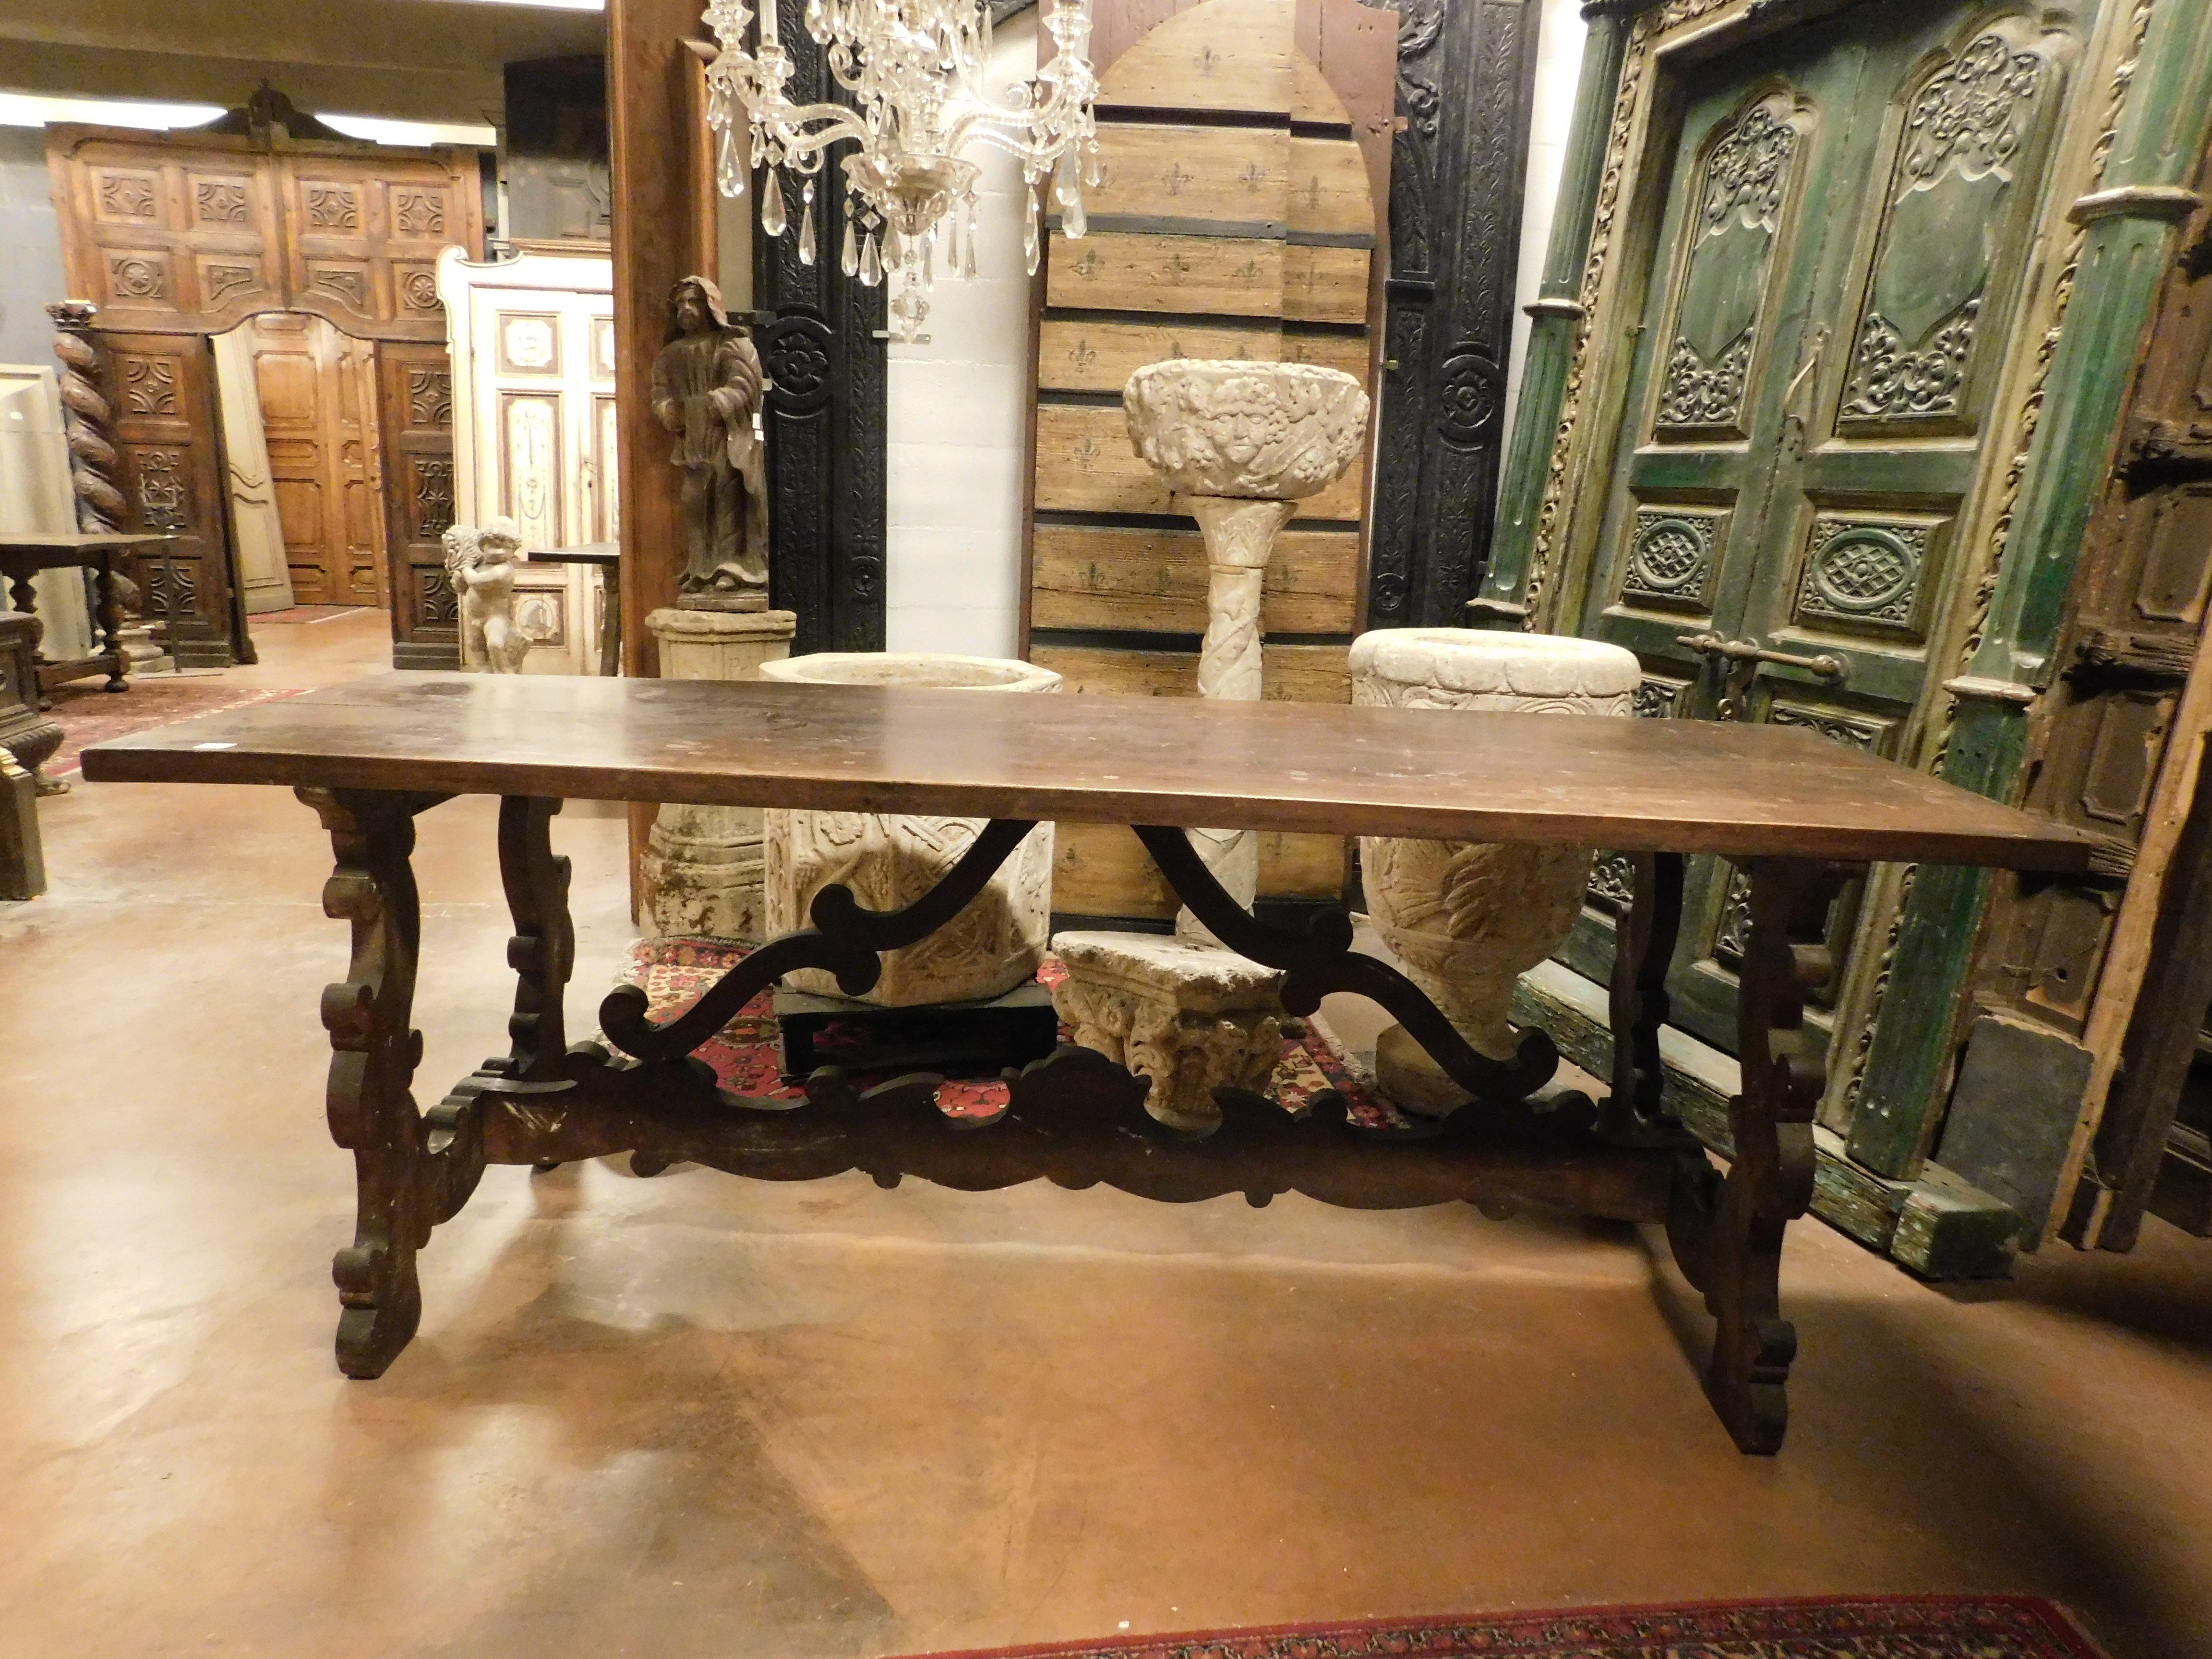 Antique large refectory table, built in walnut, has a very thick double top and richly carved wavy legs, hand-built in the late 1800s, in Italy.
Ideal both as a side table and as a possible elegant dining or study table.
maximum size cm w 224 x H 80